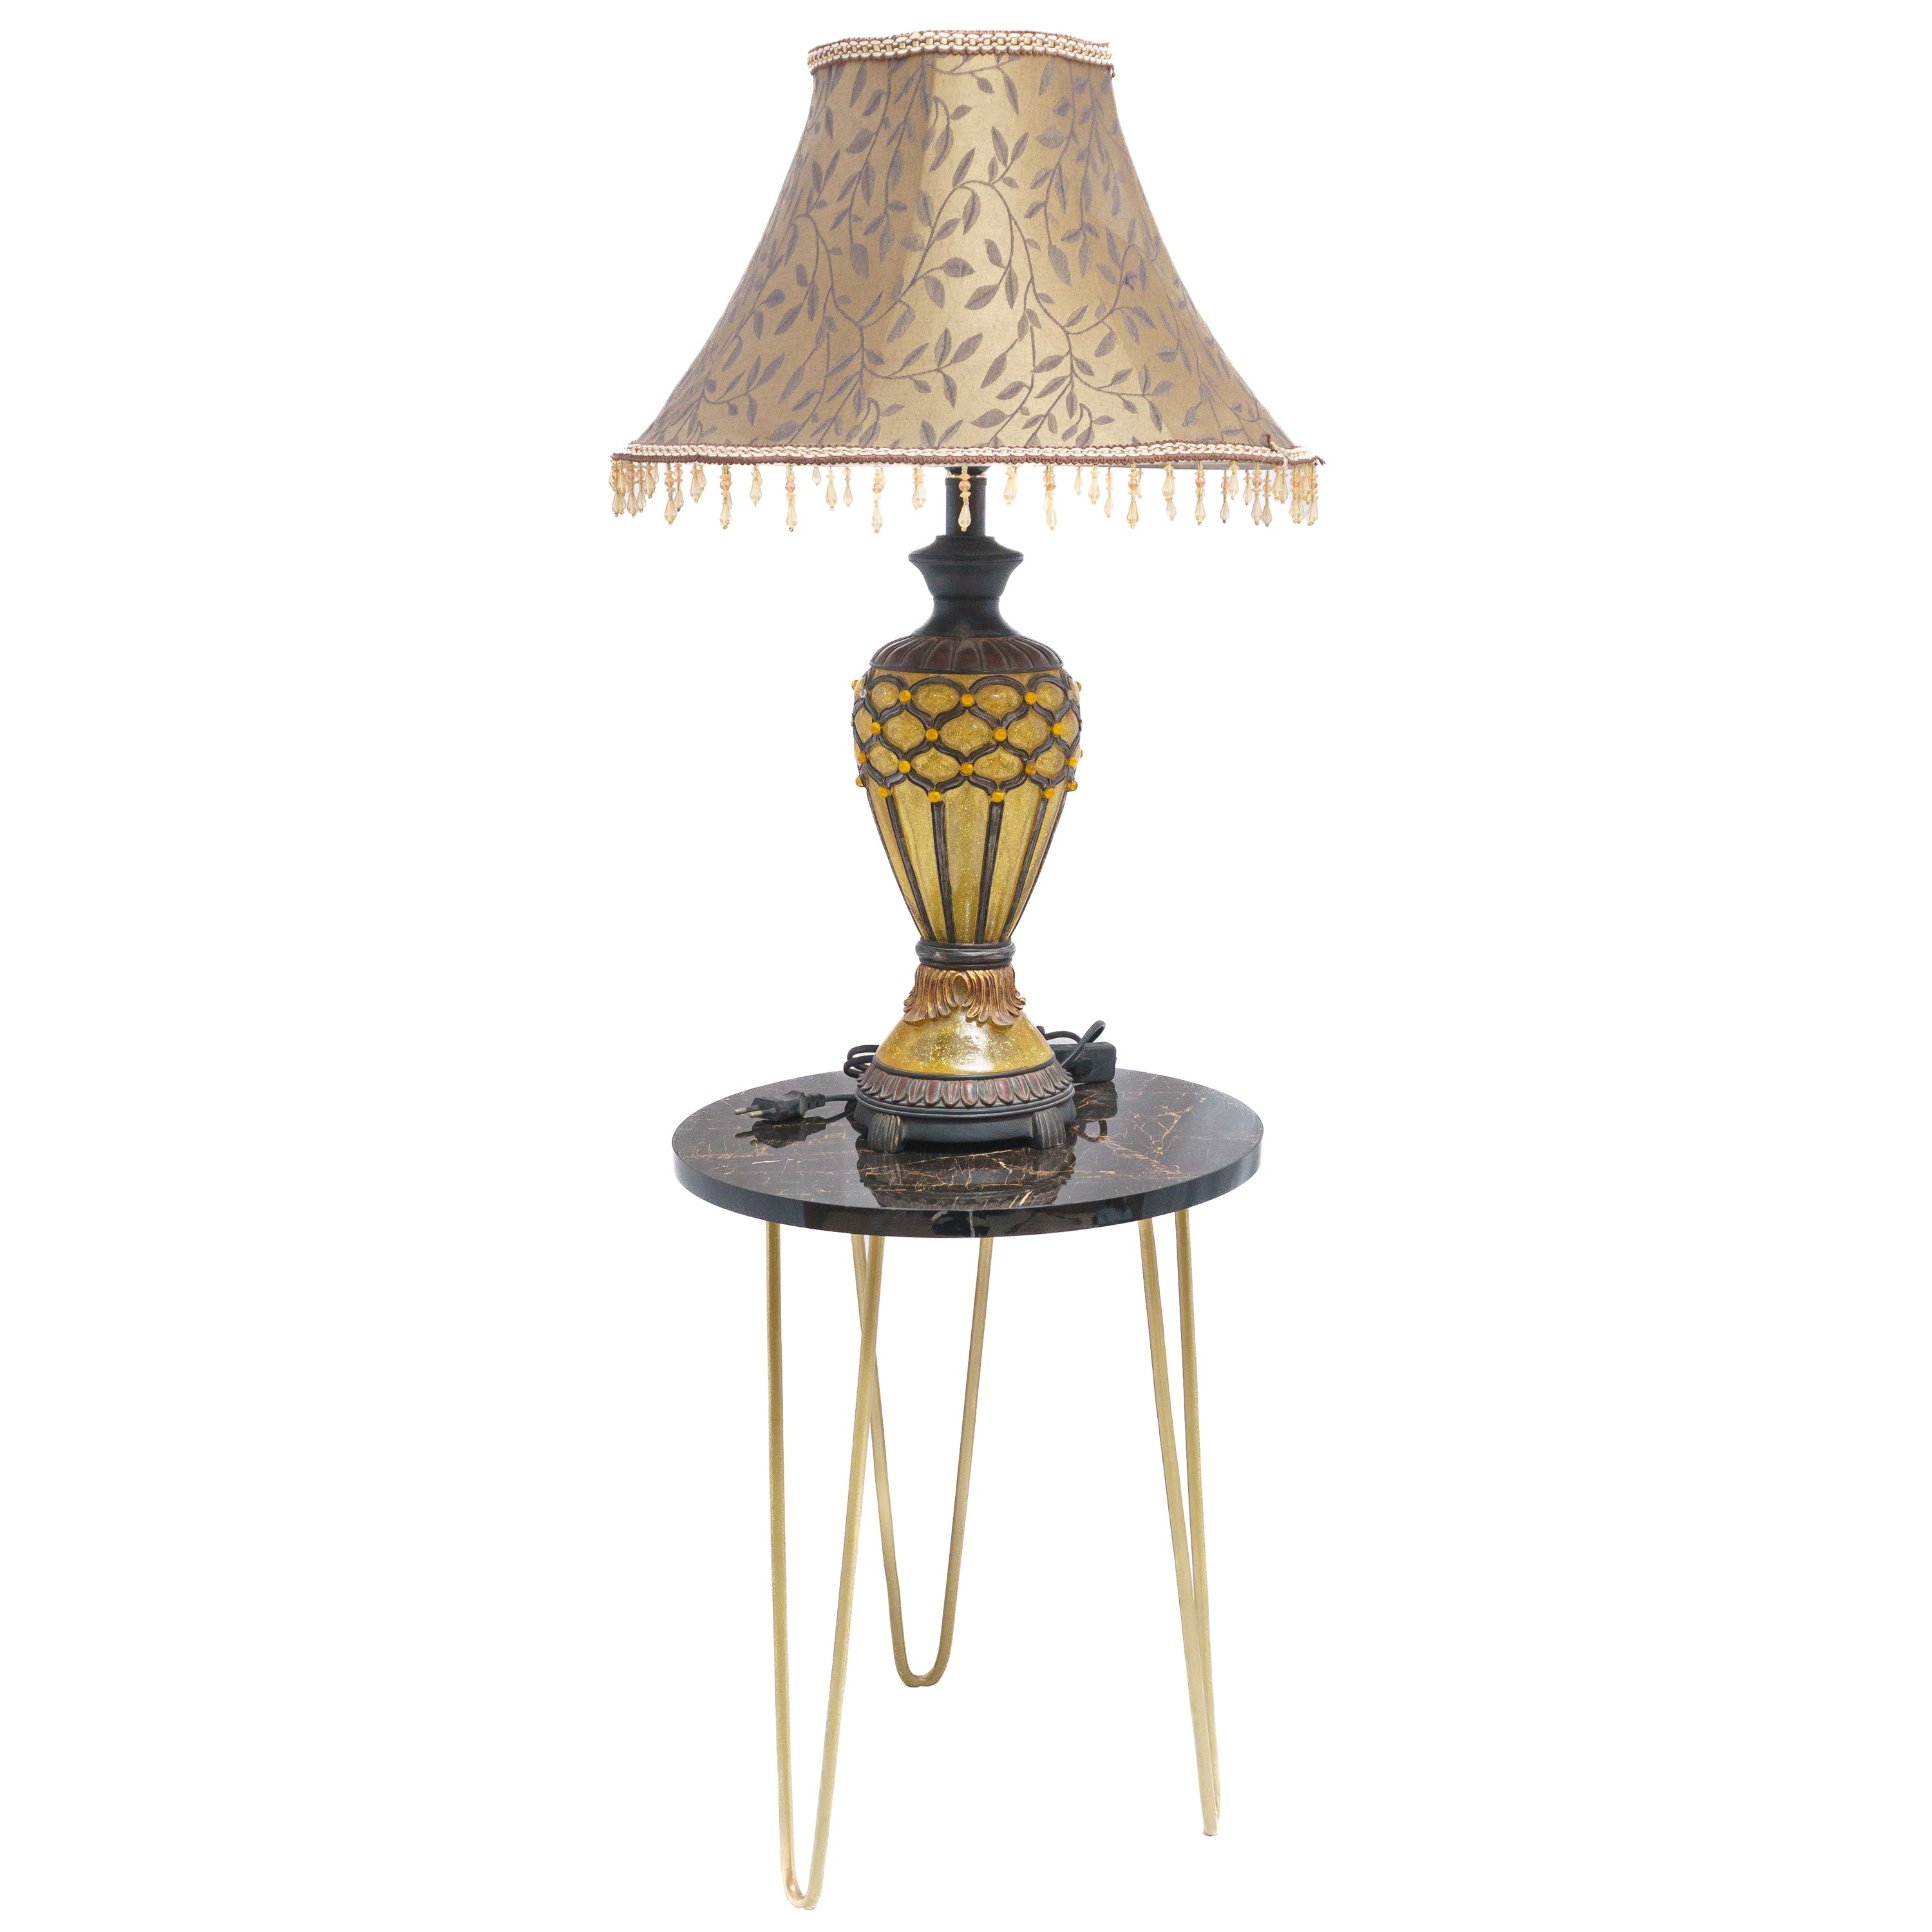 Royal Golden Bell Style Table Lamp with Leaf Design Lamp Shade and Ornate Lamp Stand